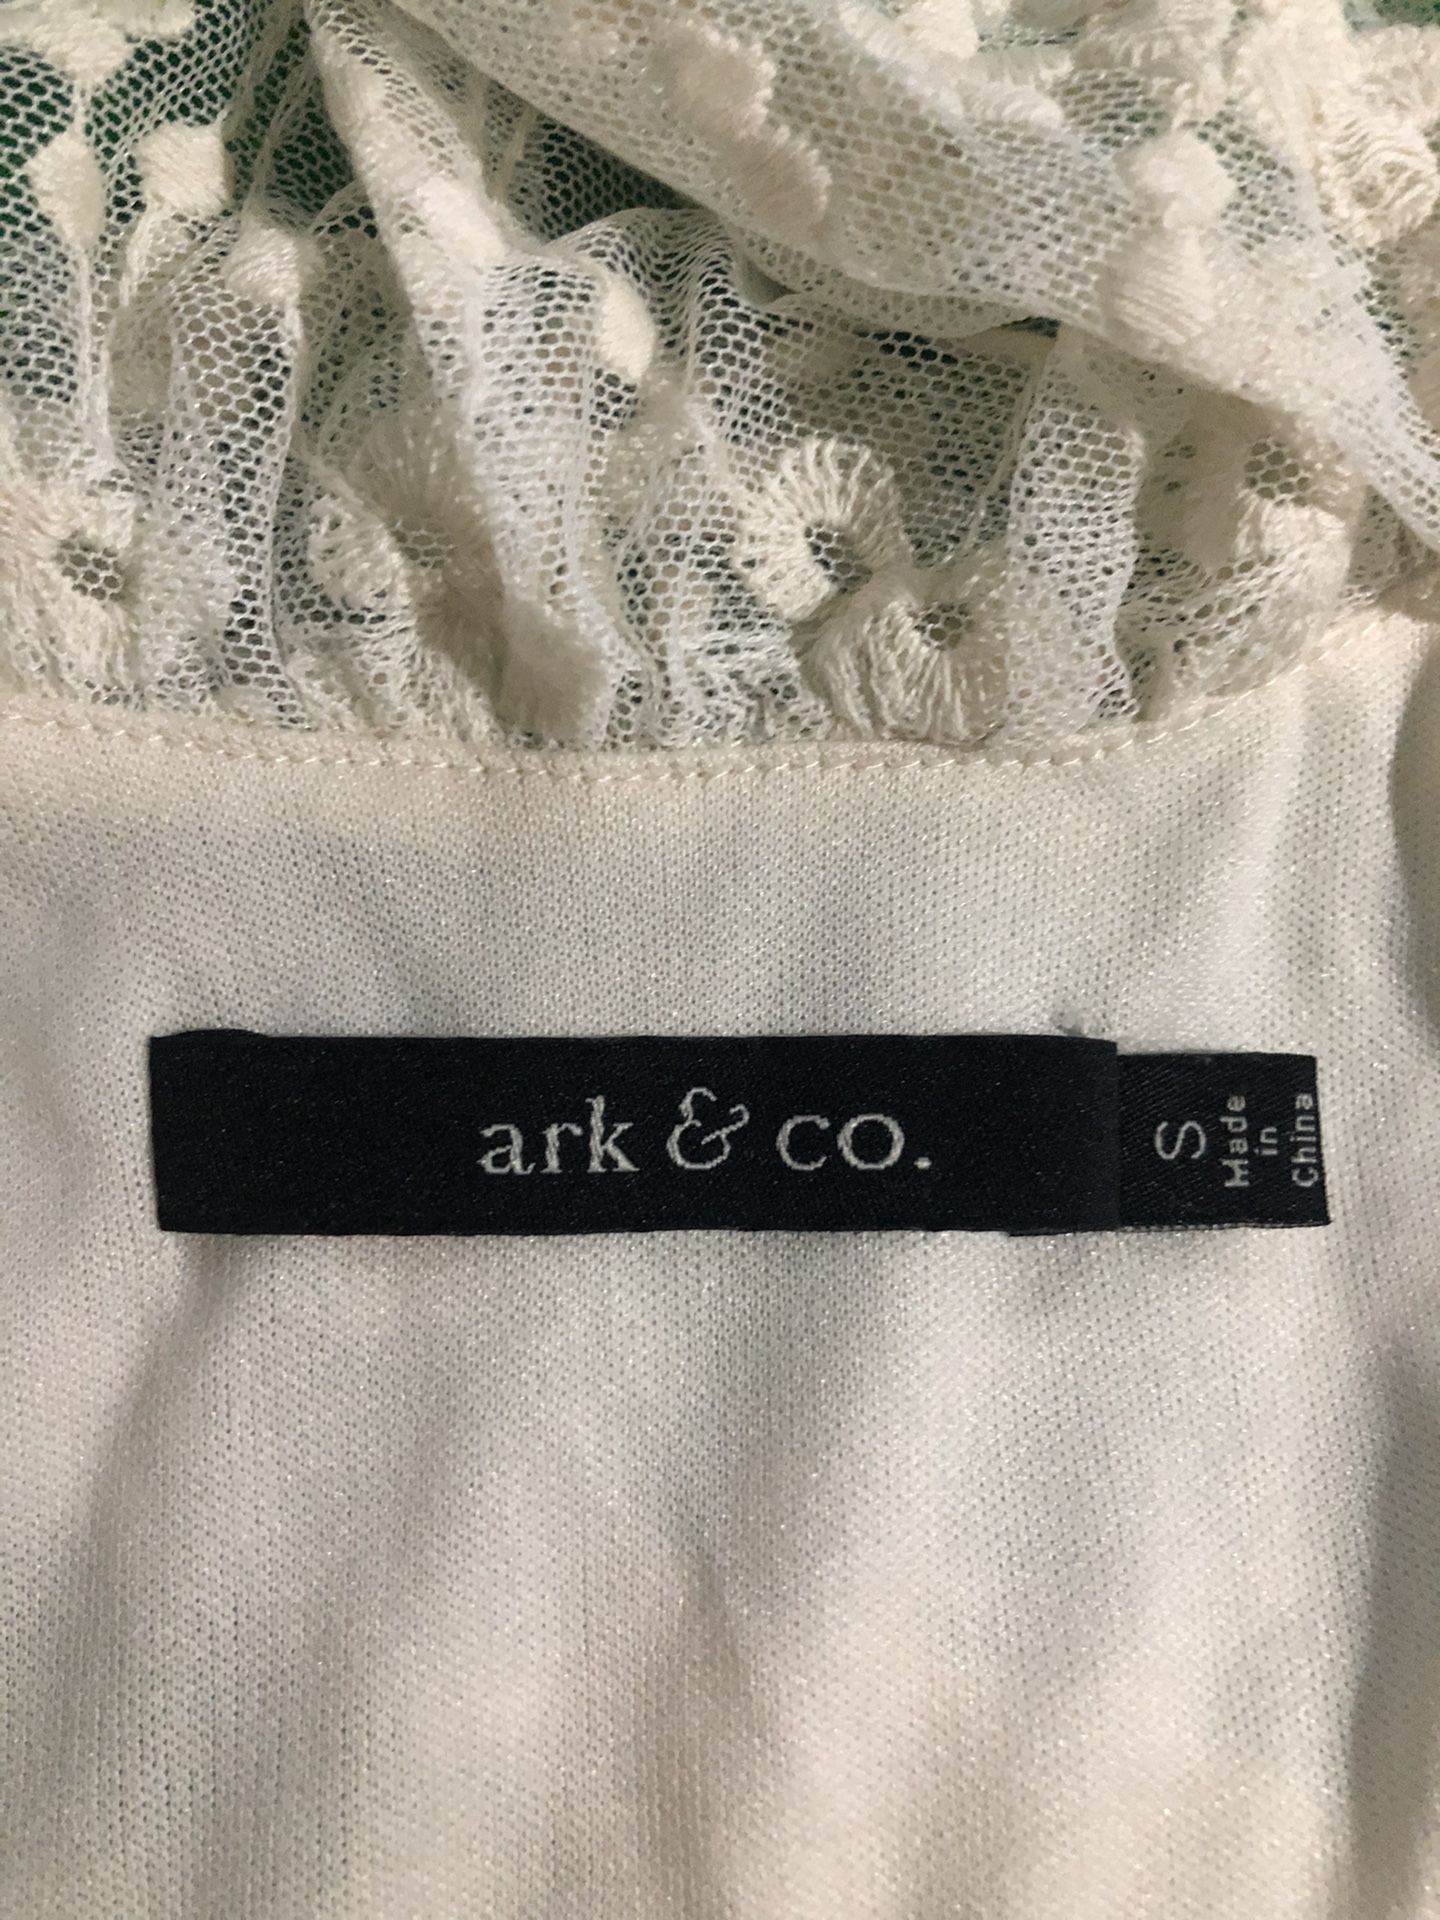 Ark & co. Wedding Dress size Small off white with lace